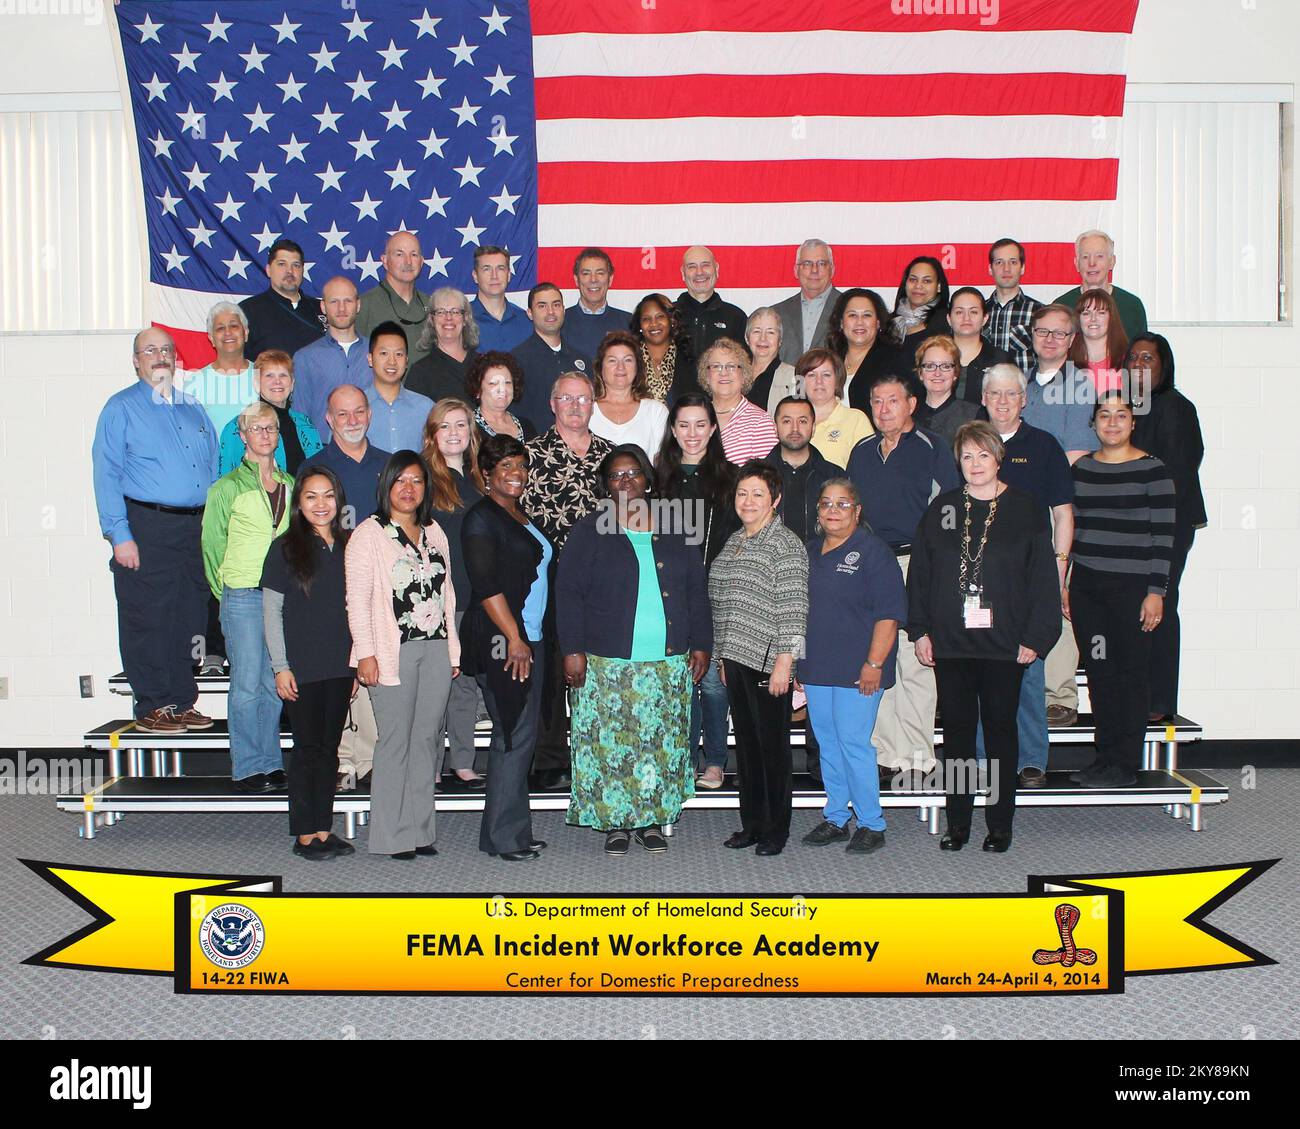 Anniston, Ala., March 25, 2014   Class photo of FEMA's Incident Workforce Academy at Center for Domestic Preparedness.. Photographs Relating to Disasters and Emergency Management Programs, Activities, and Officials Stock Photo